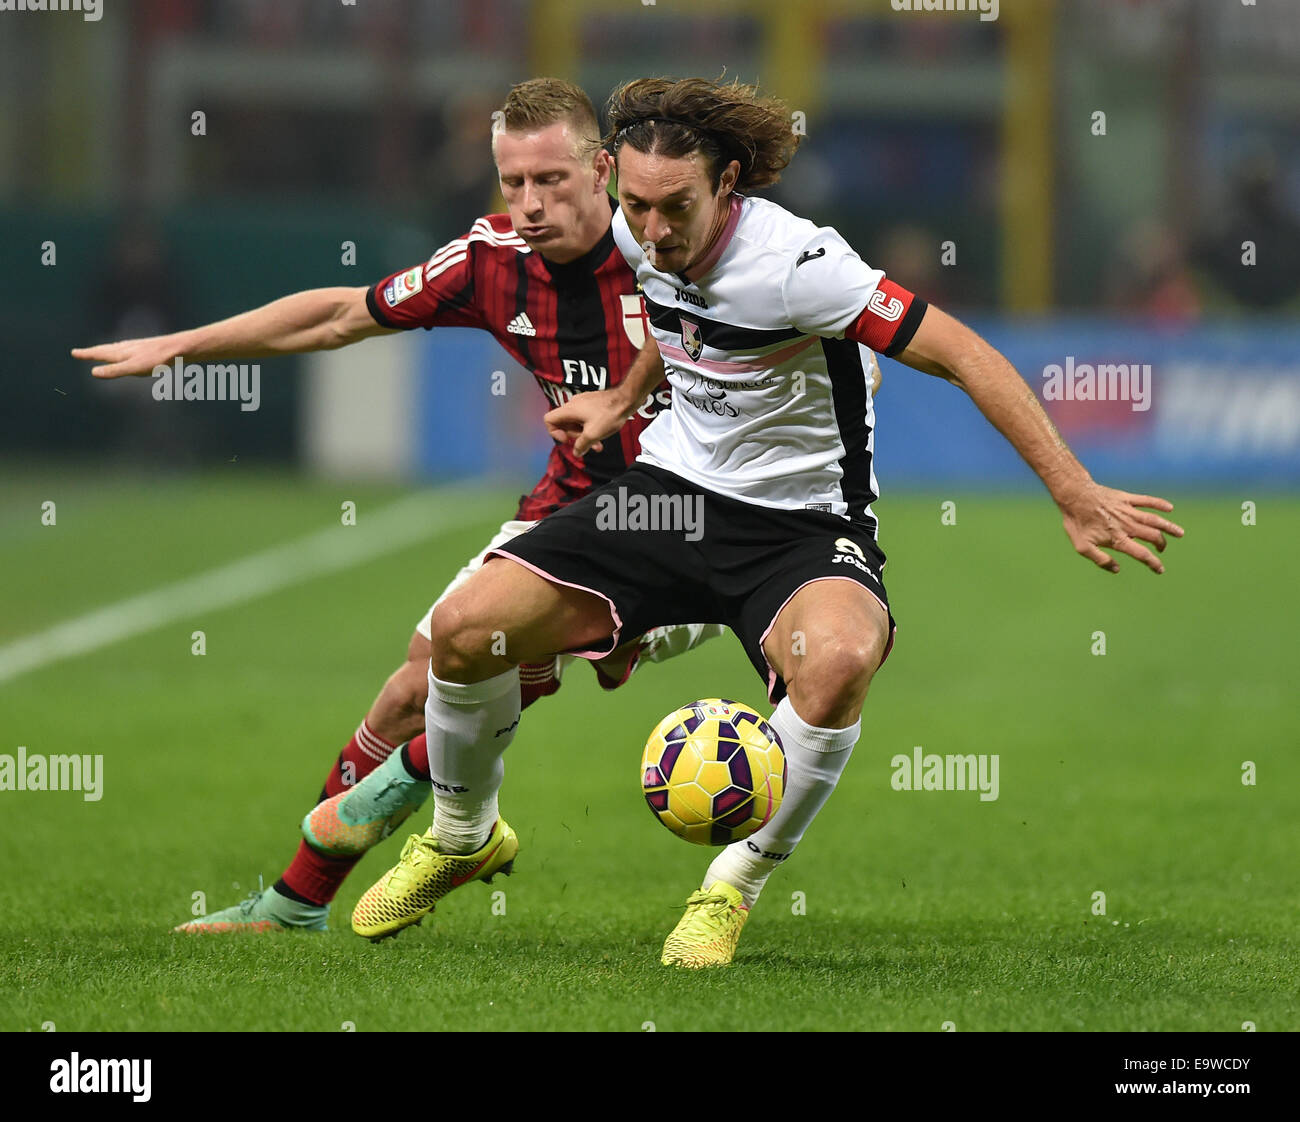 Milan, Italy. 2nd Nov, 2014. Ignazio Abate (L) of AC Milan vies with Edgar Barreto of Palermo during their Serie A football match in Milan, Italy, on Nov. 2, 2014. AC Milan lost 0-2. © Alberto Lingria/Xinhua/Alamy Live News Stock Photo